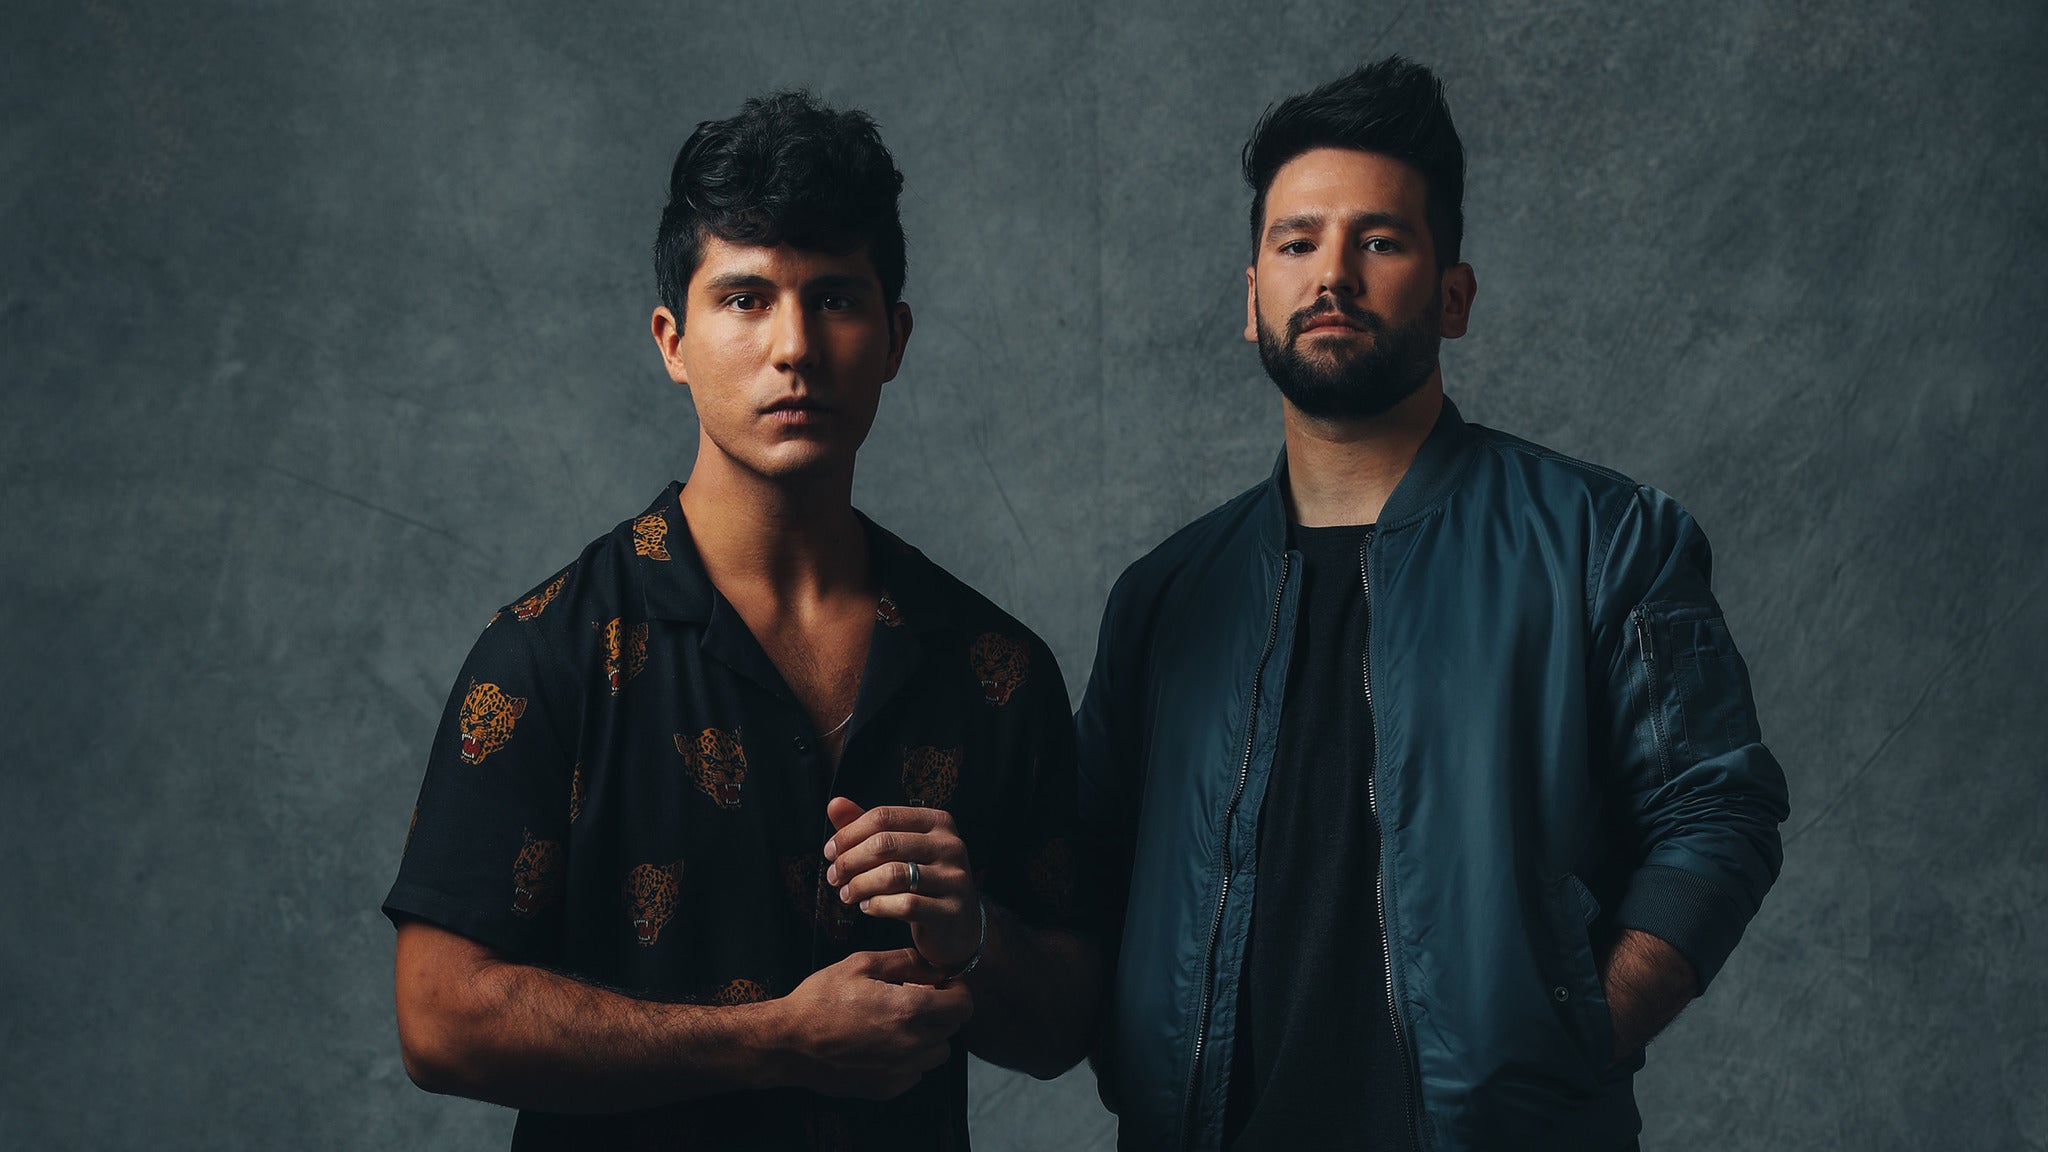 Dan + Shay The (Arena) Tour in North Little Rock event information